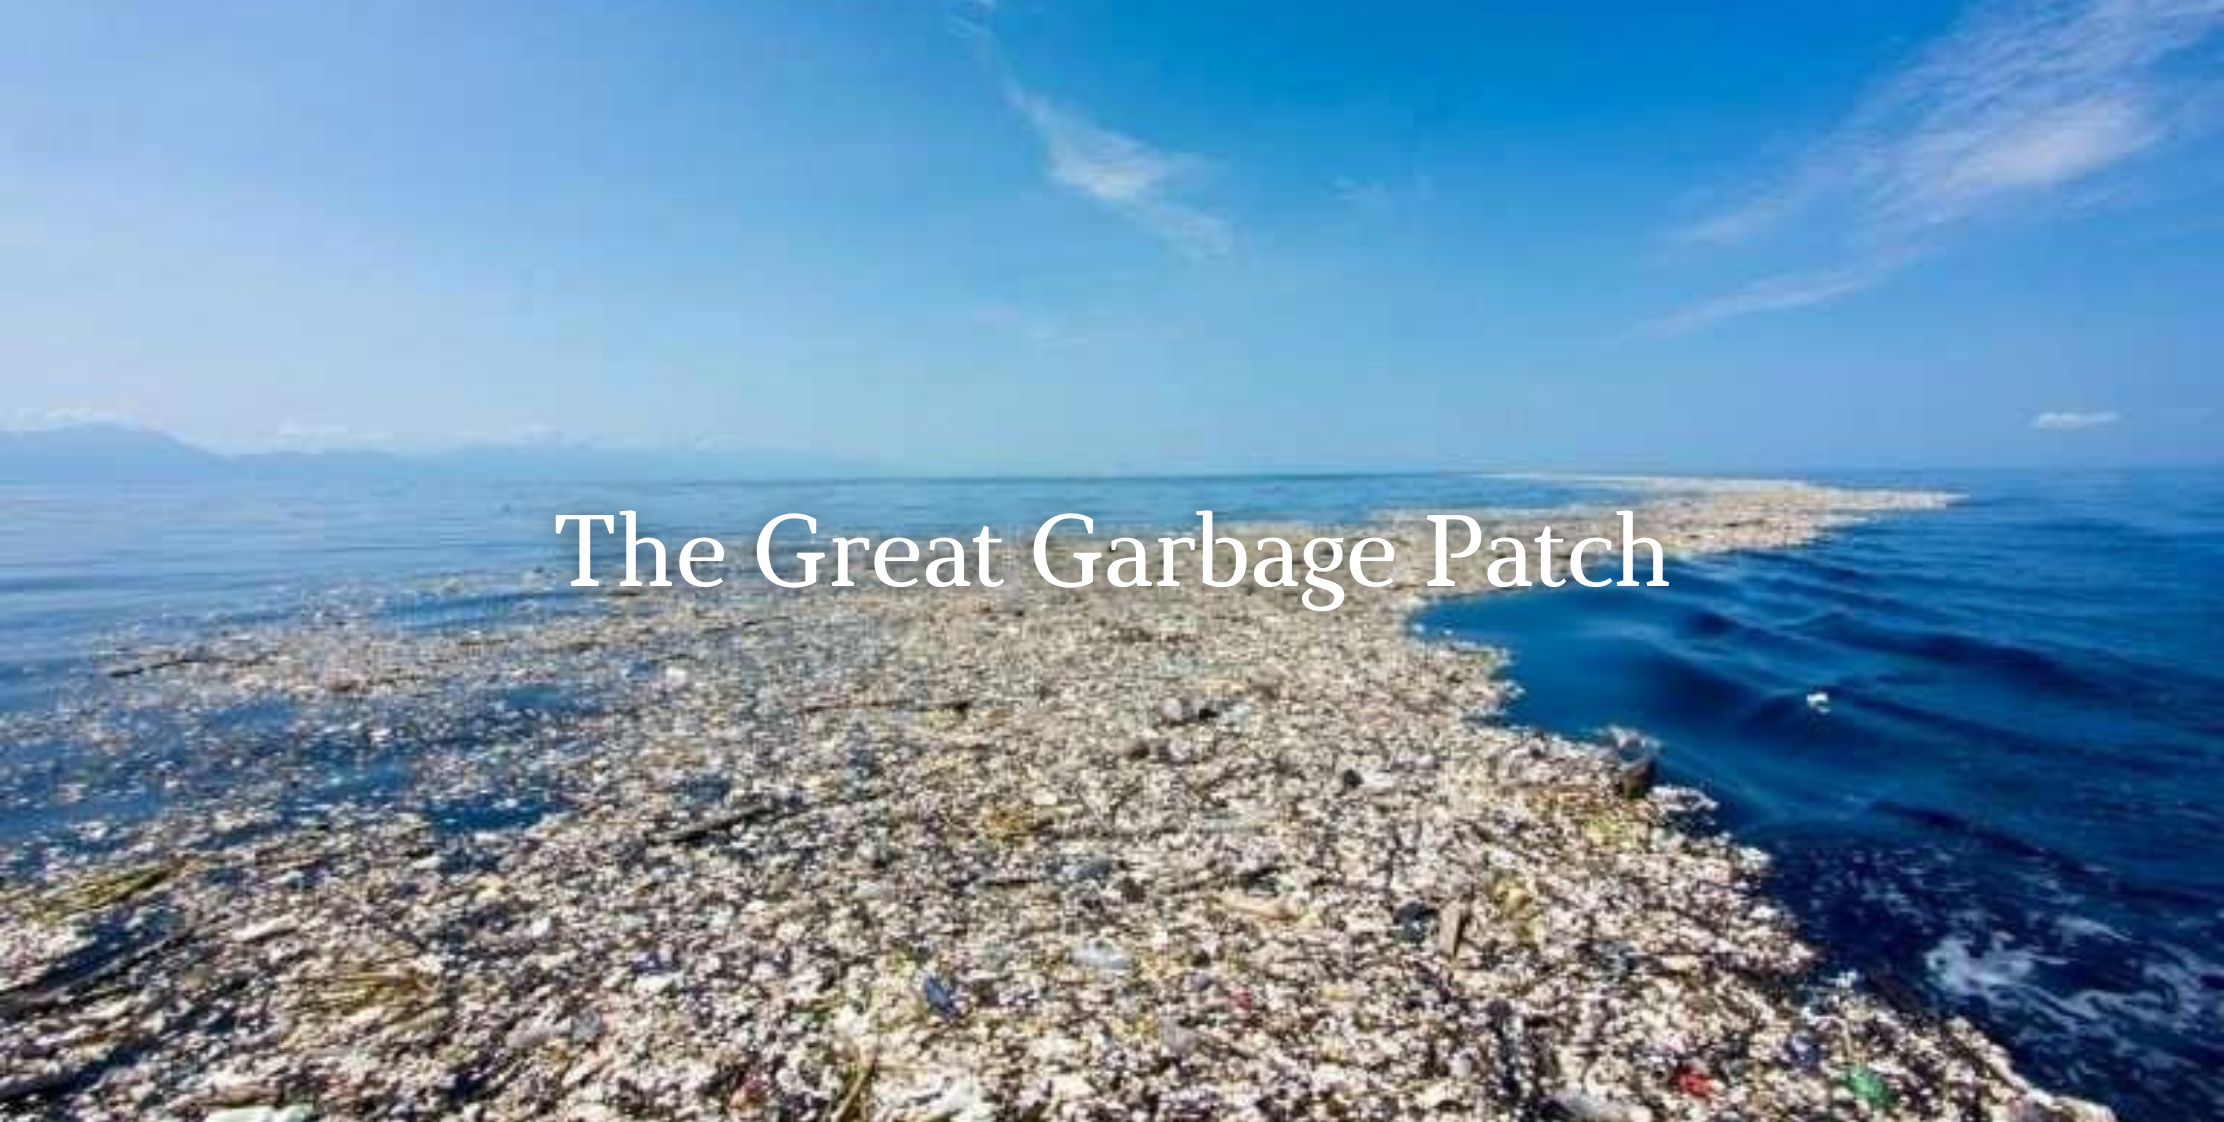 The Great Garbage Patch image